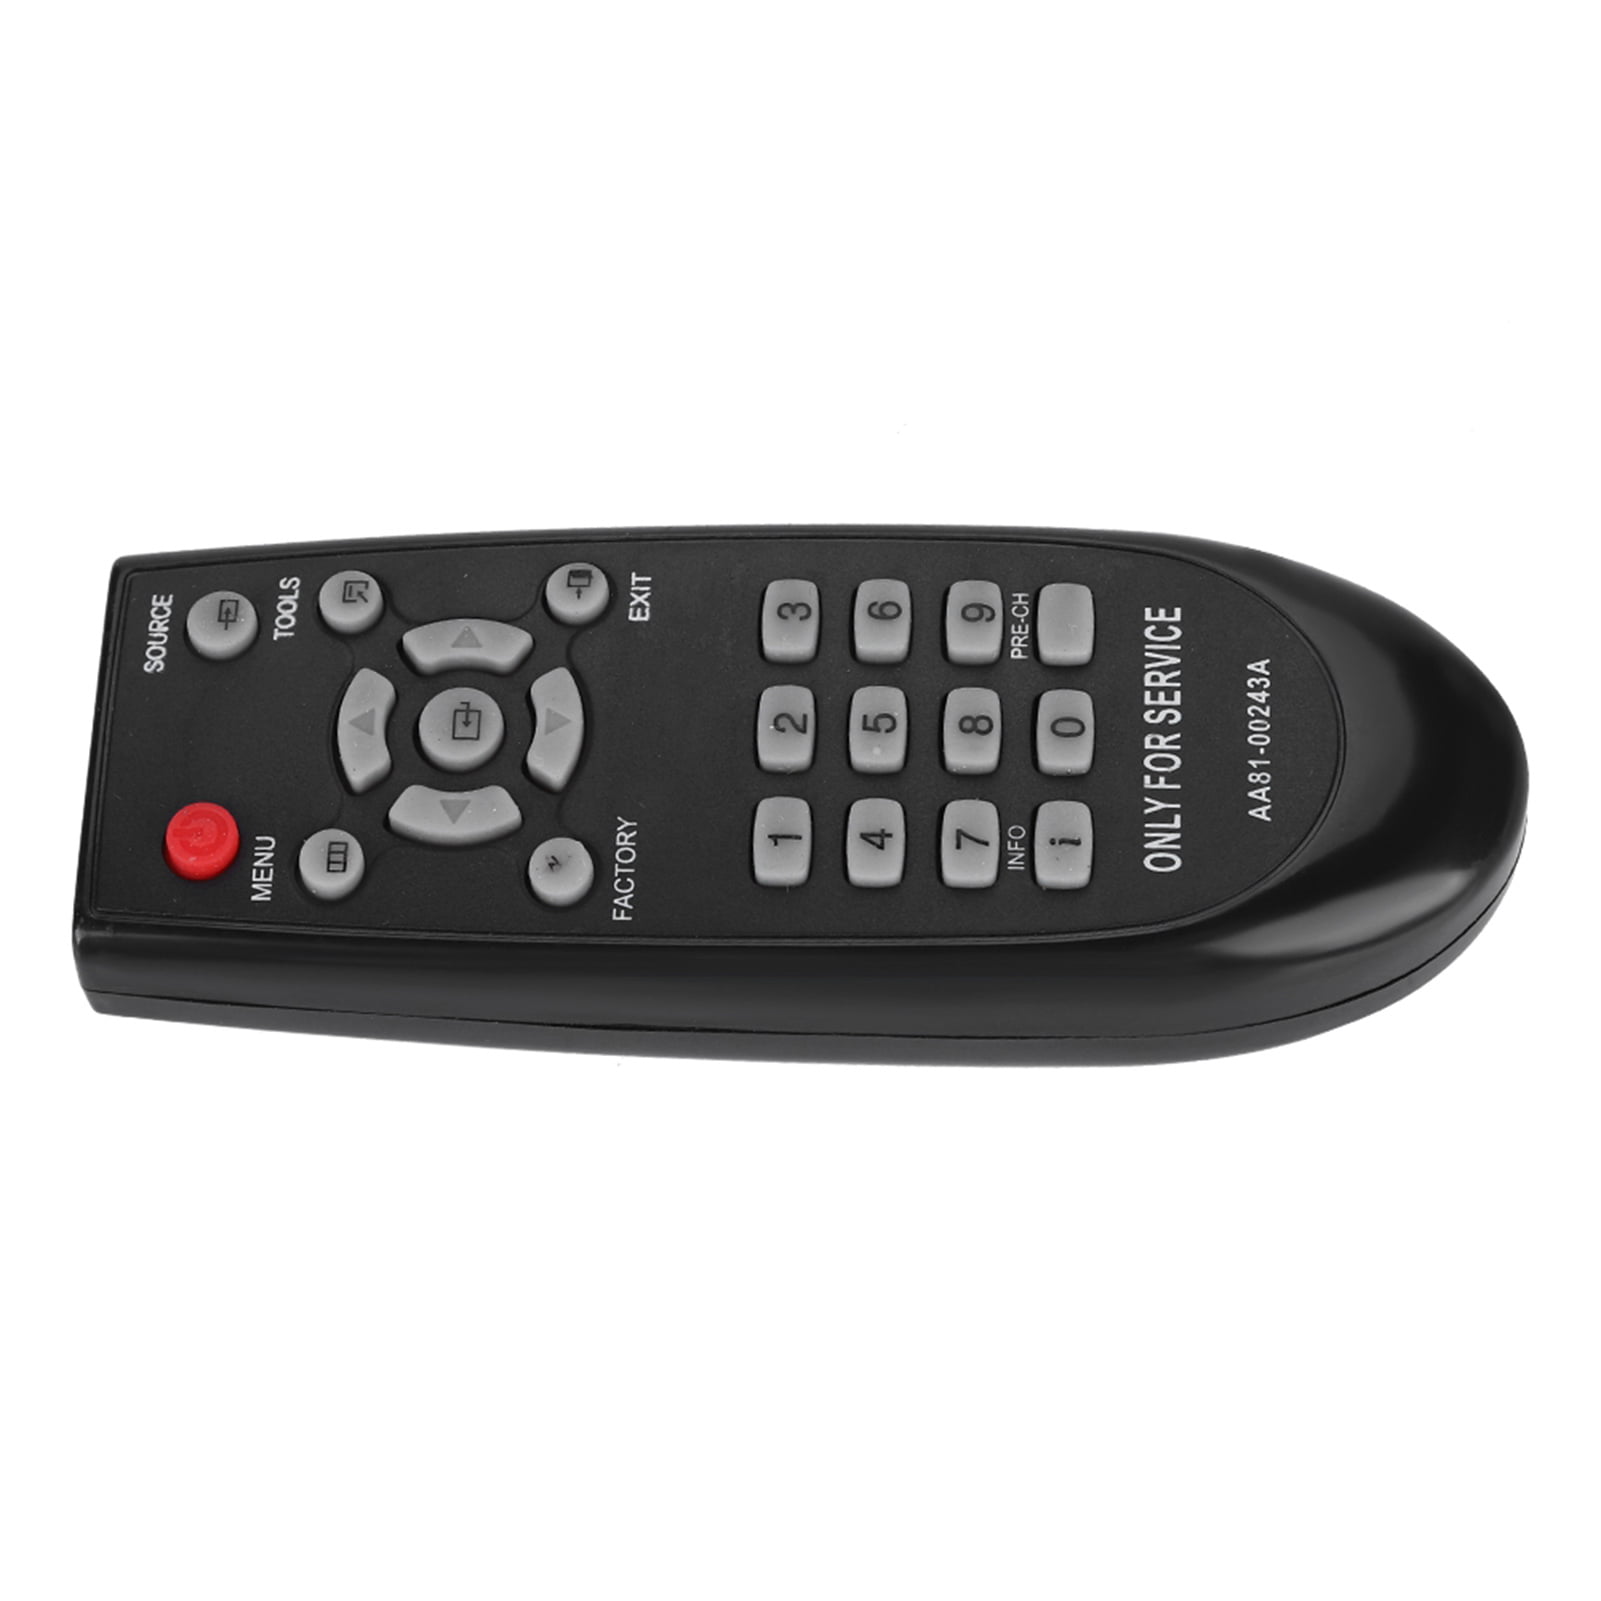 Remote Control for Epson Powerlite 83 83 US Only Replacement REPL 